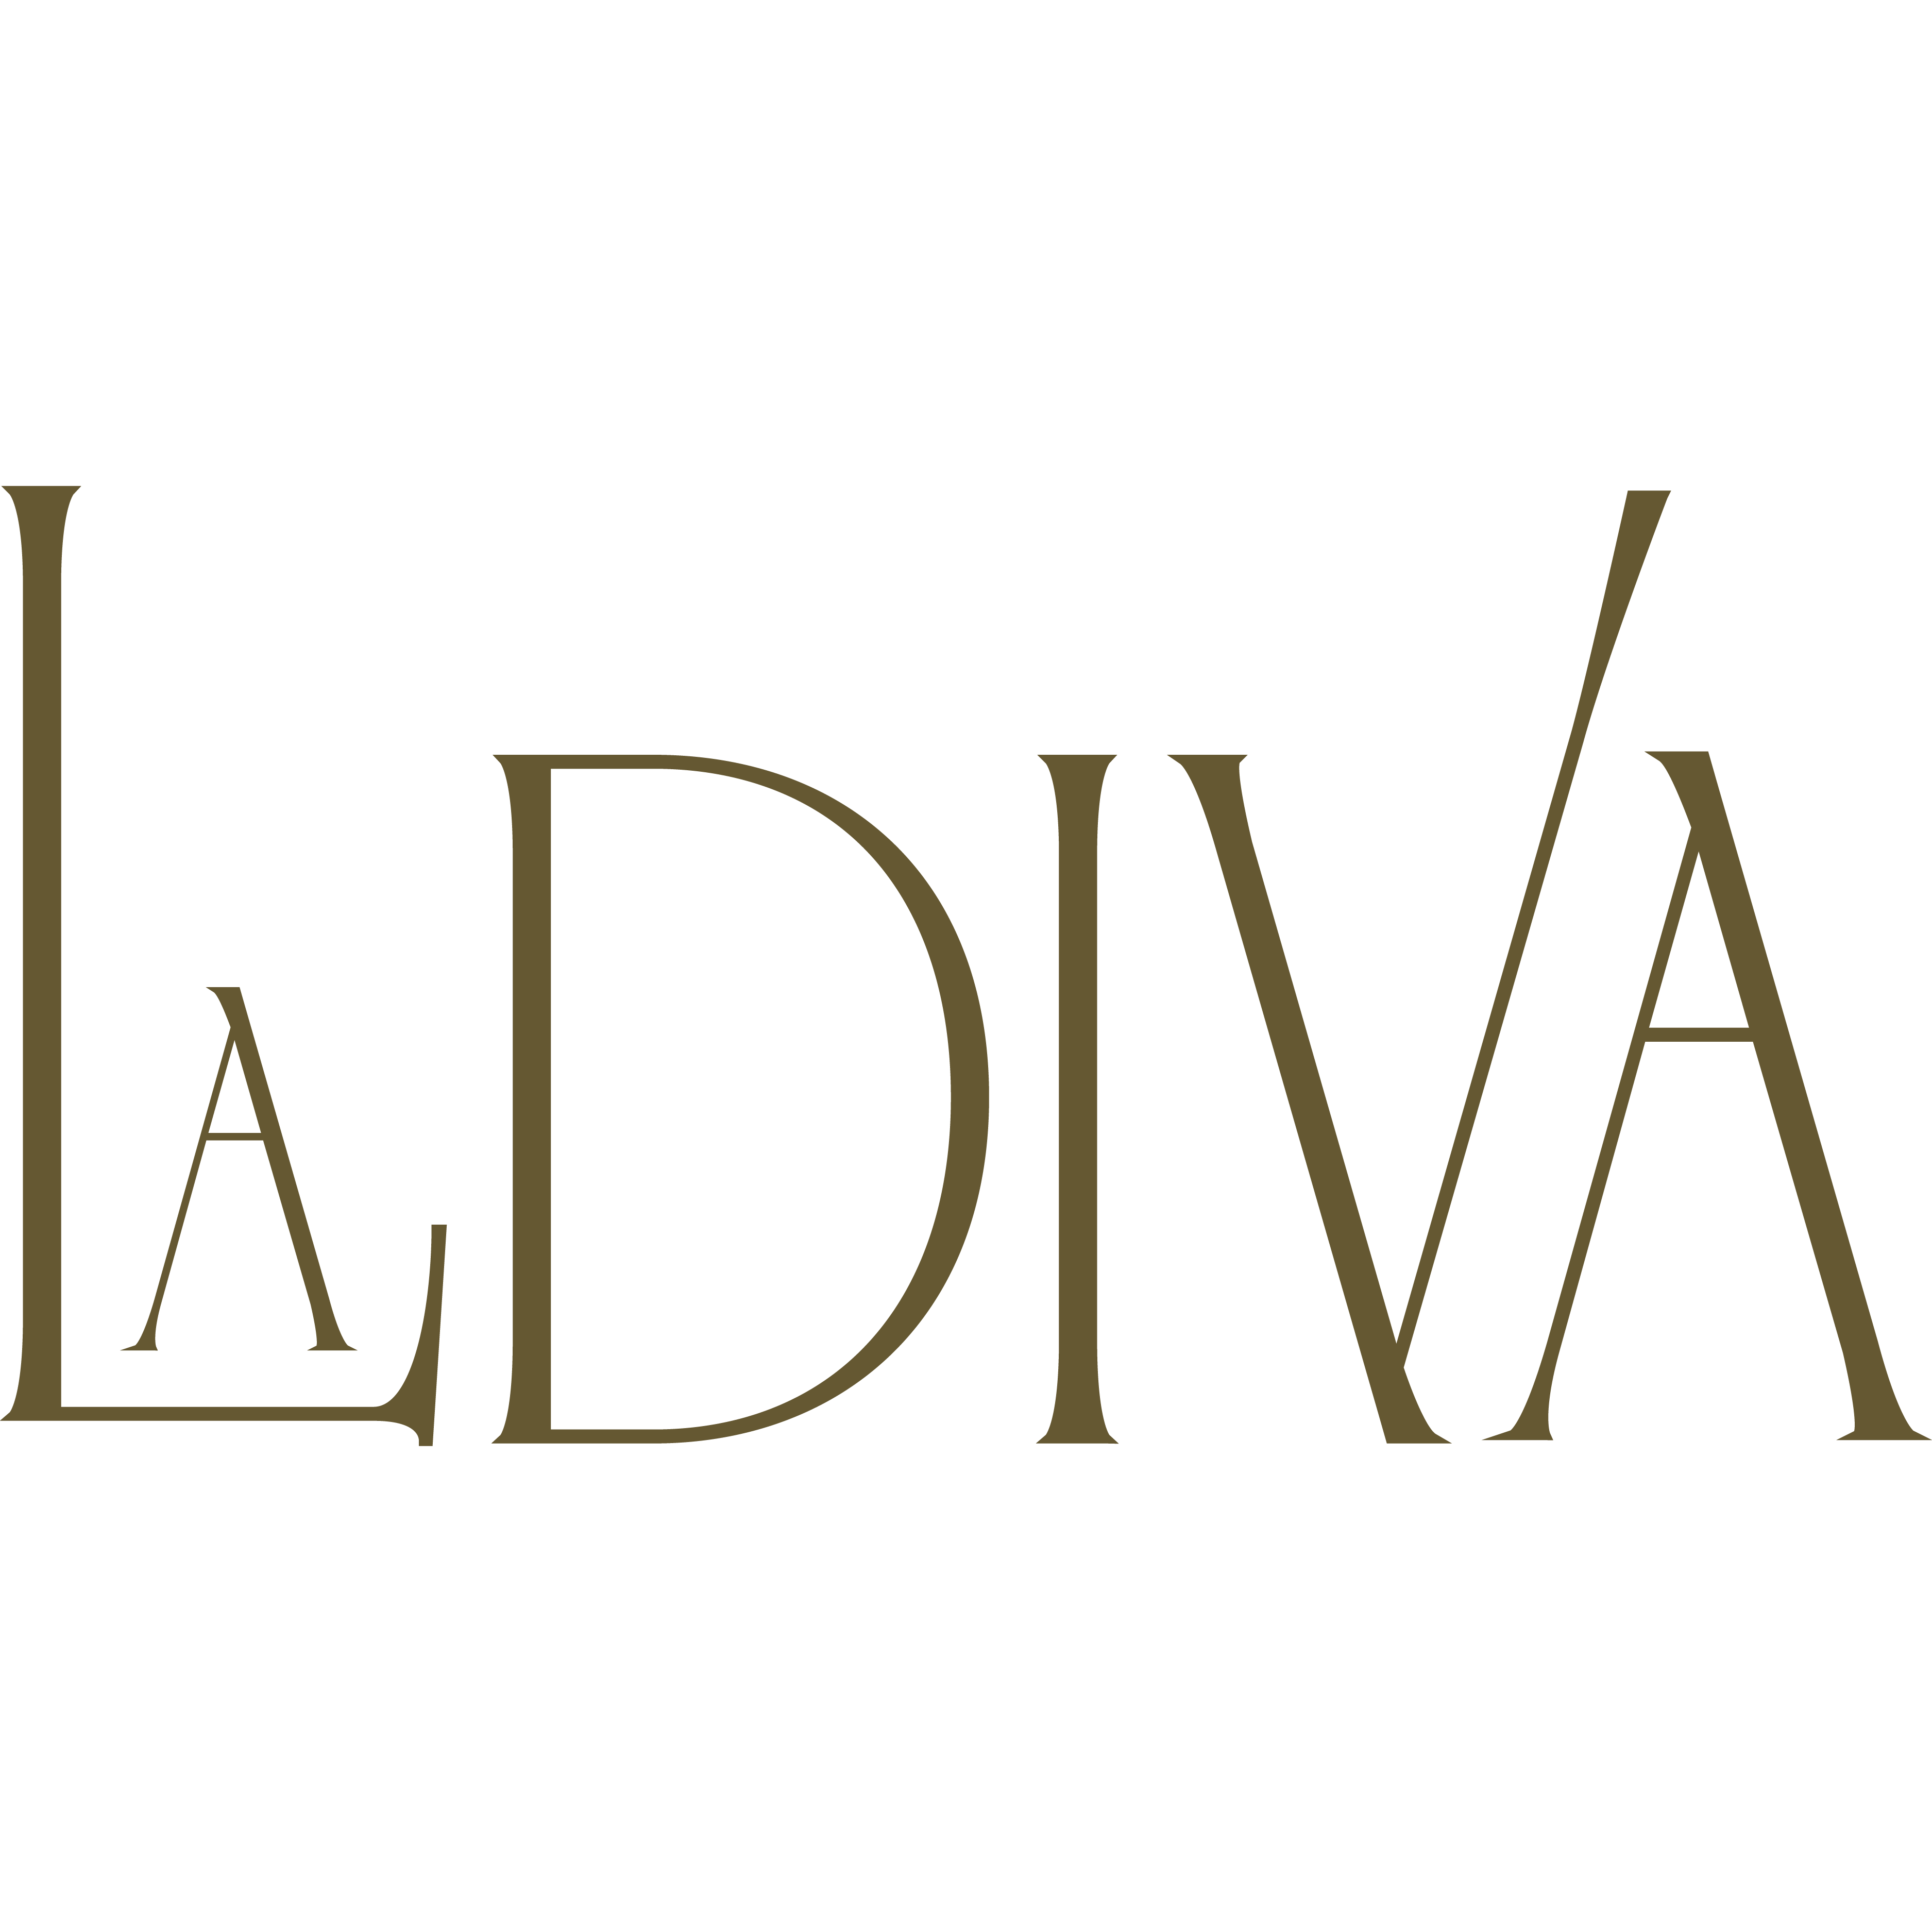 Type treatment for LaDiva lobby bar logo design by logo designer Daniel Fernandez for your inspiration and for the worlds largest logo competition